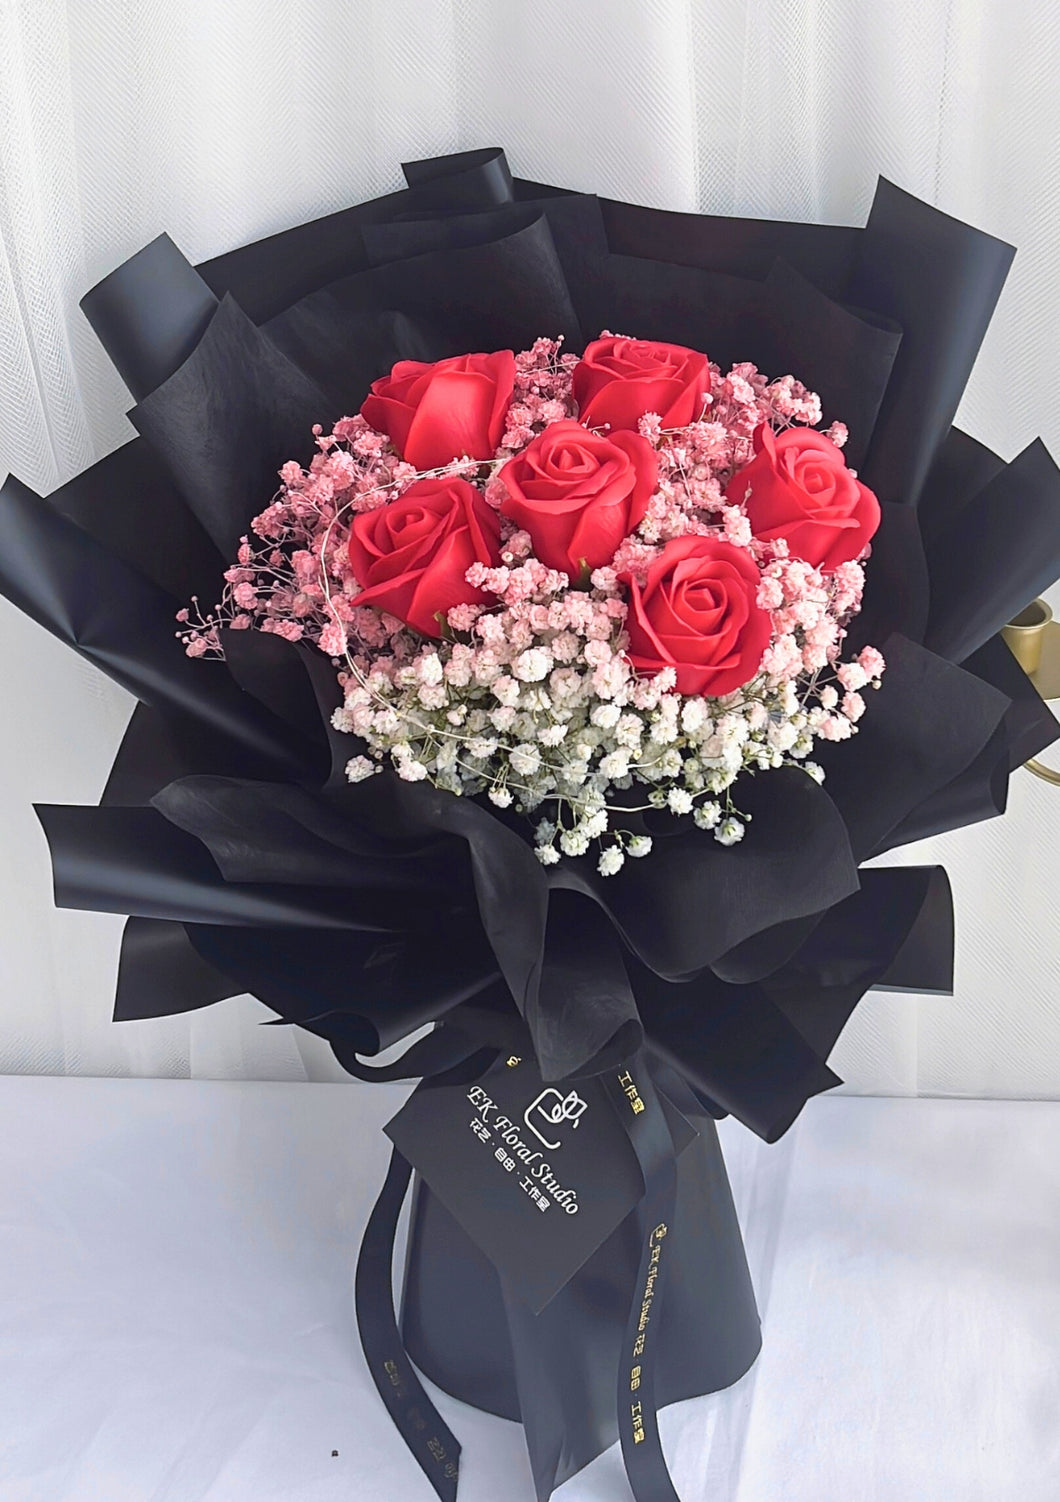 Pink and white Fresh Rose with Baby Breath Soap Flower Bouquet 红玫瑰与粉白满天星香皂花束